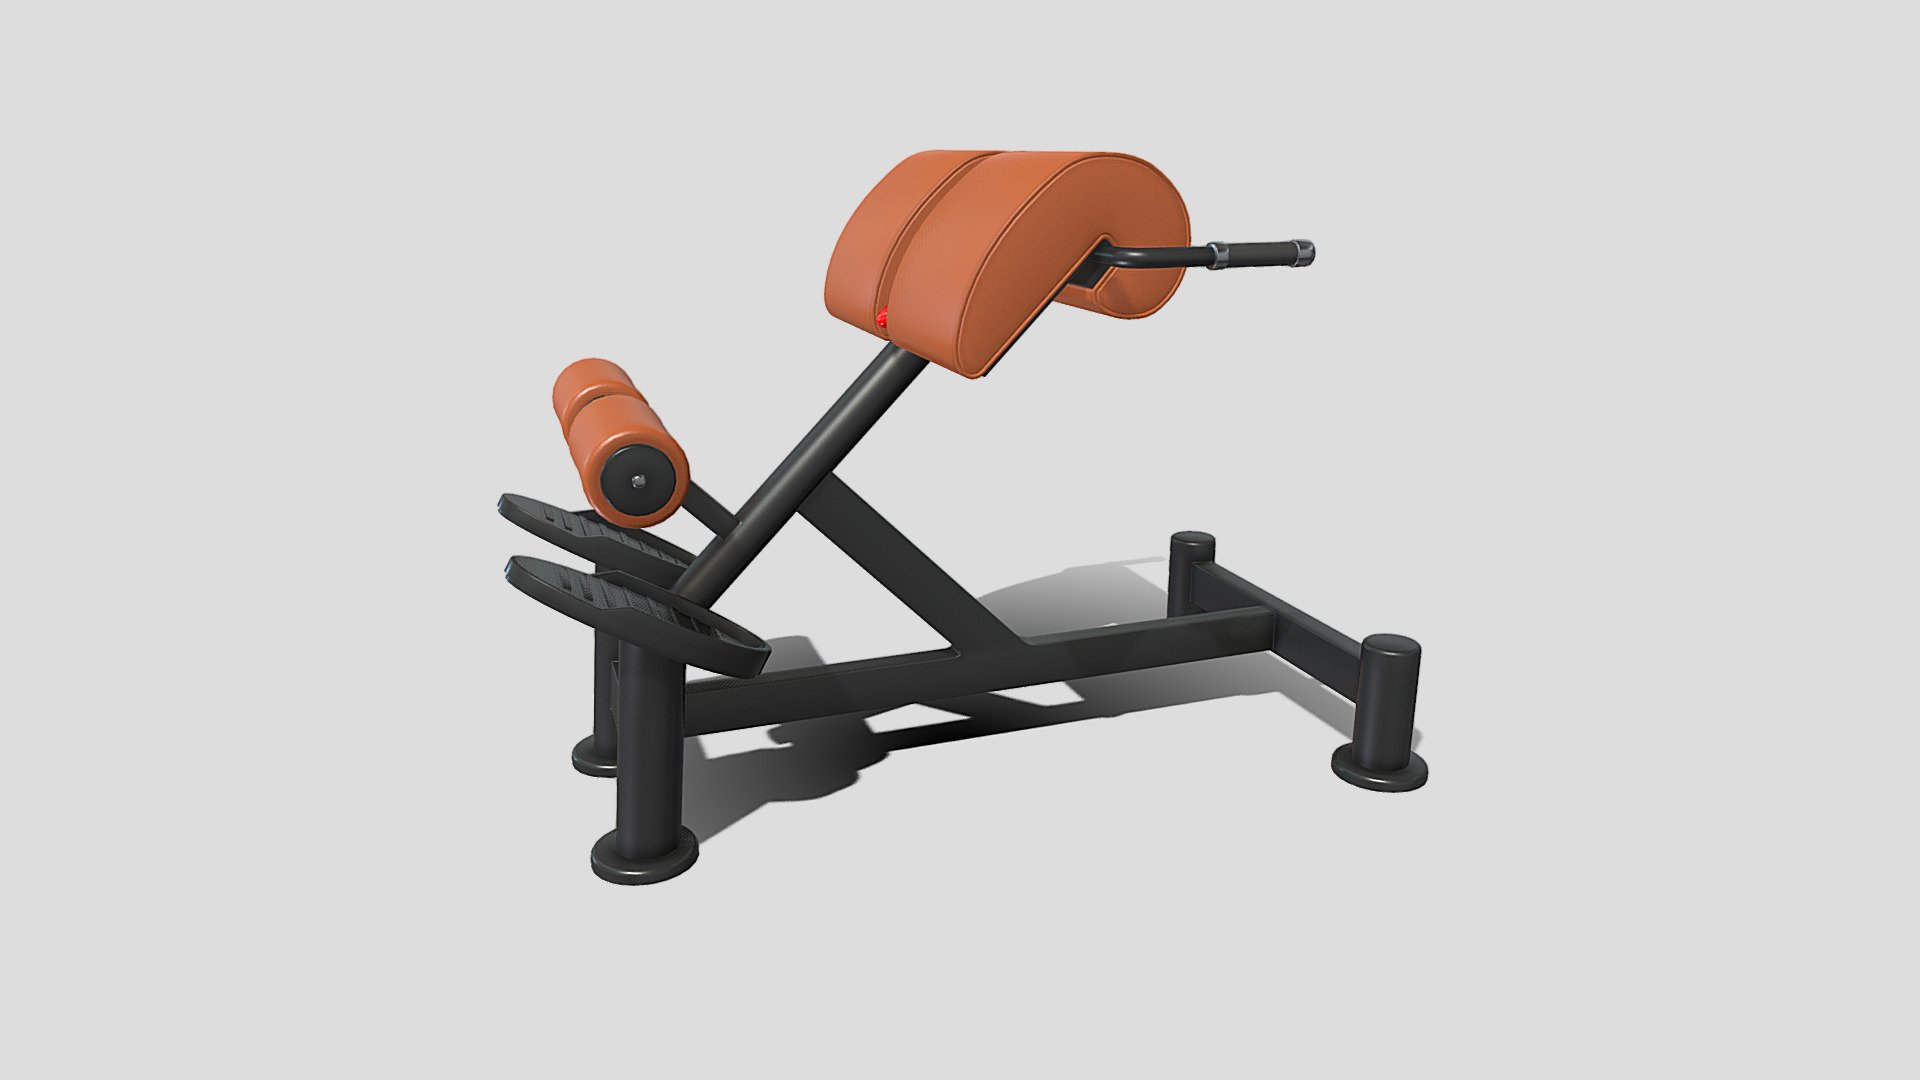 Gym machine 3d model built to real size, rendered with Cycles in Blender, as per seen on attached images. 

File formats:
-.blend, rendered with cycles, as seen in the images;
-.obj, with materials applied;
-.dae, with materials applied;
-.fbx, with materials applied;
-.stl;

Files come named appropriately and split by file format.

3D Software:
The 3D model was originally created in Blender 3.1 and rendered with Cycles.

Materials and textures:
The models have materials applied in all formats, and are ready to import and render.
Materials are image based using PBR, the model comes with five 4k png image textures.

Preview scenes:
The preview images are rendered in Blender using its built-in render engine &lsquo;Cycles'.
Note that the blend files come directly with the rendering scene included and the render command will generate the exact result as seen in previews.

General:
The models are built mostly out of quads.

For any problems please feel free to contact me.

Don't forget to rate and enjoy! - Hyperextension bench - Buy Royalty Free 3D model by dragosburian 3d model